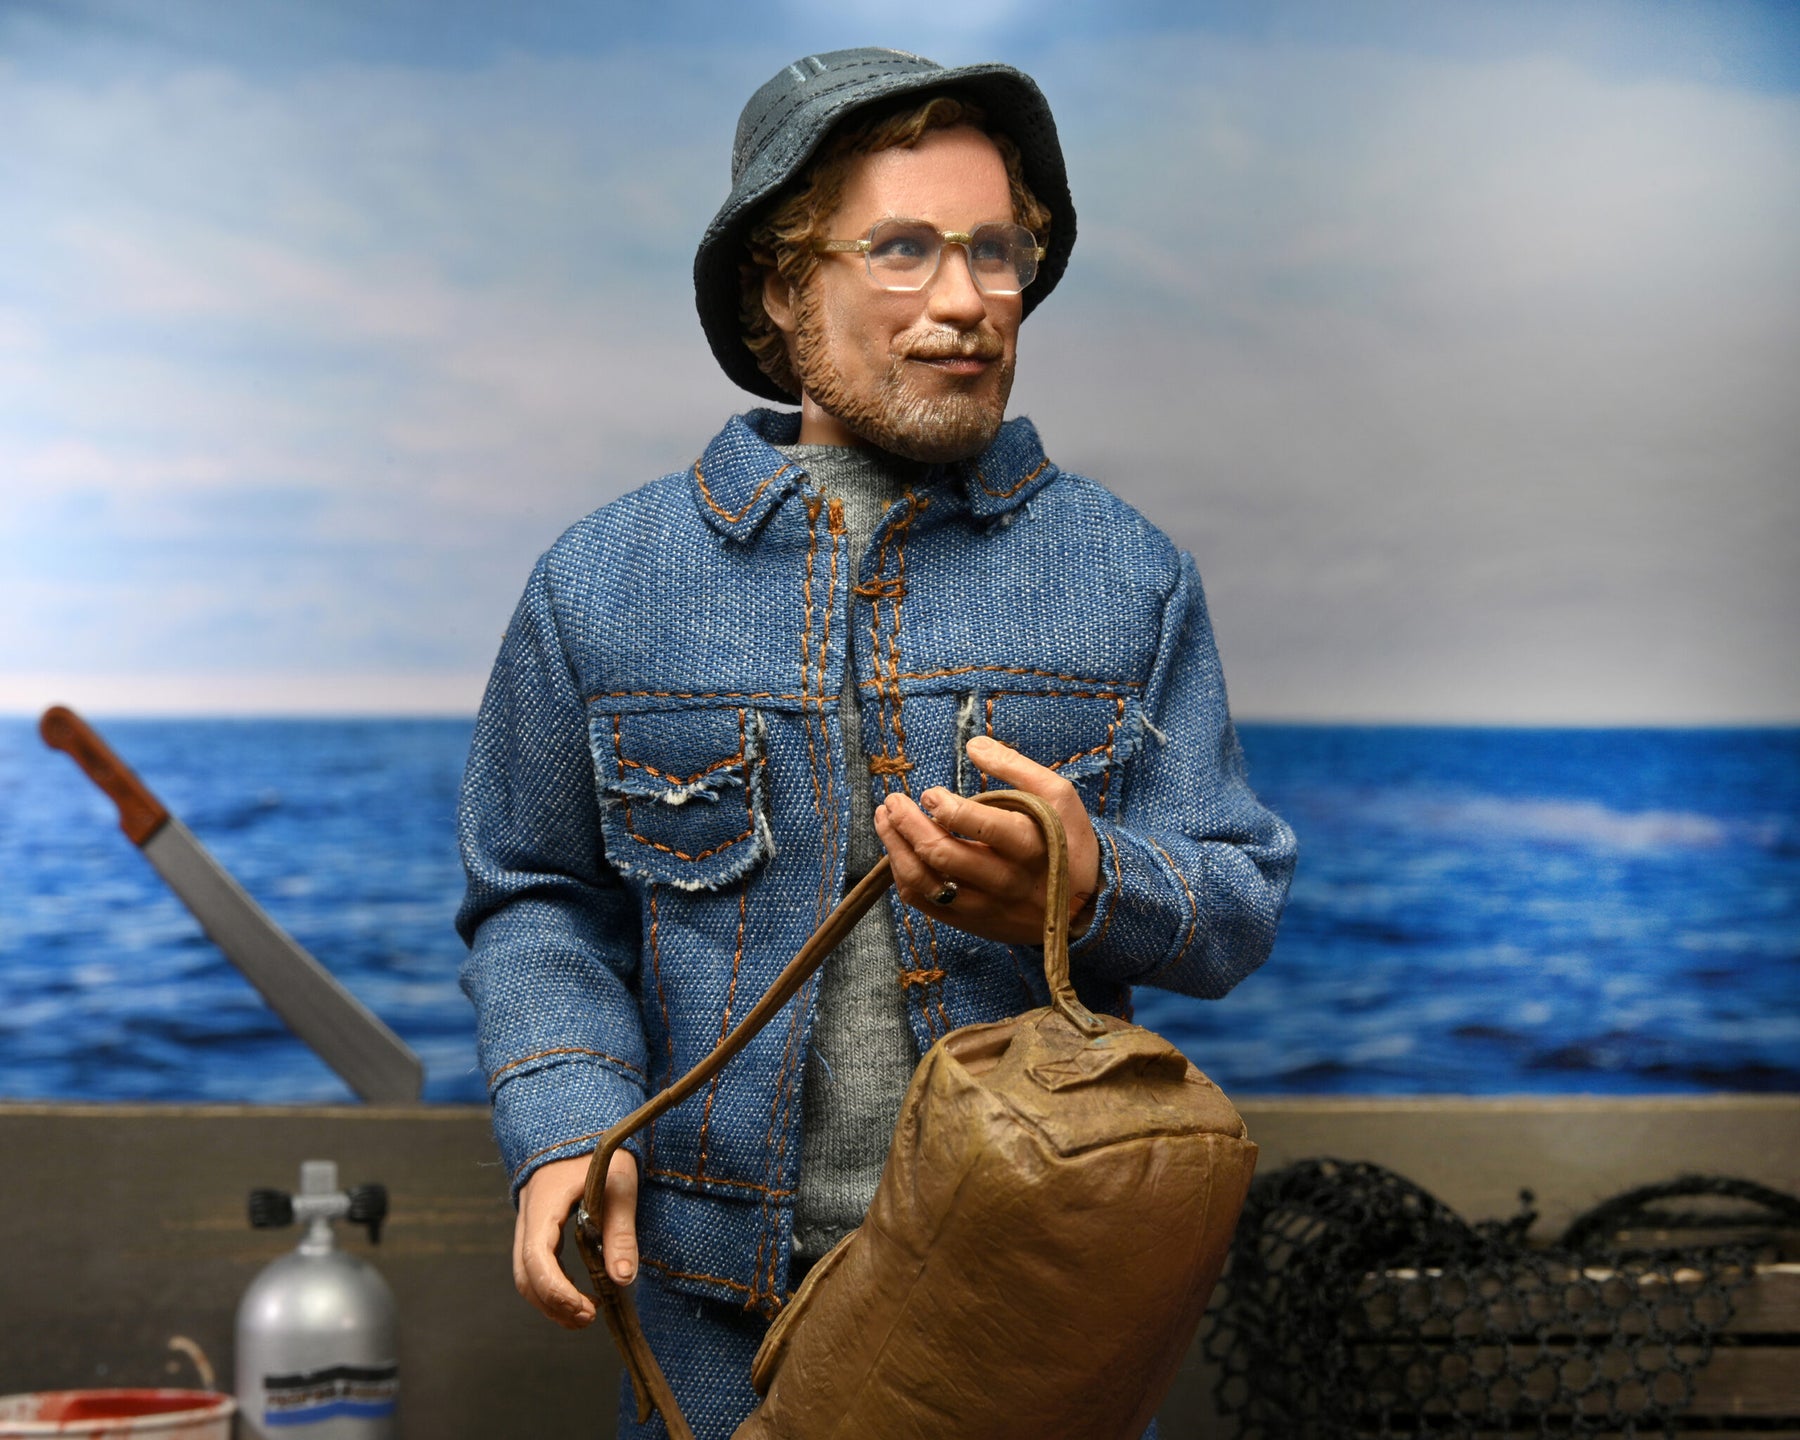 NECA - Jaws - Hooper (Amity Arrival) 8" Clothed Action Figure